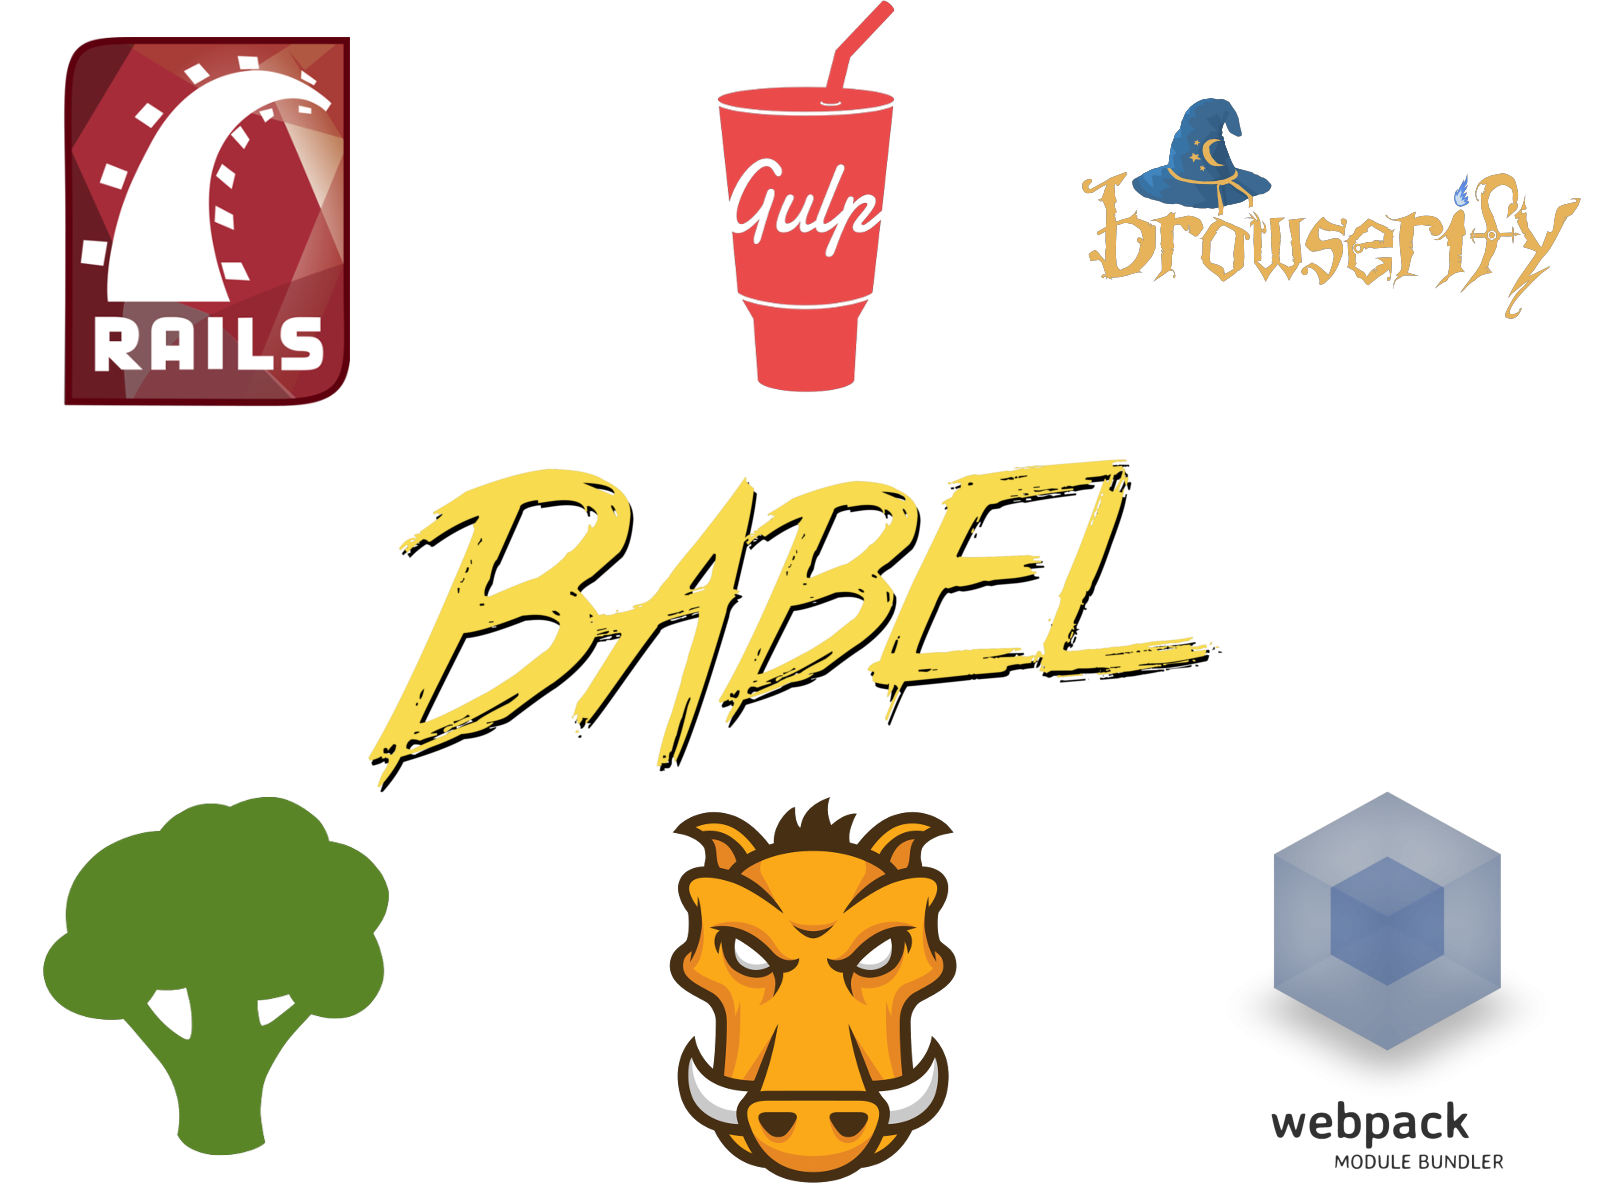 Babel can be used with Rails, Broccoli, Gulp, Grunt, Browserify, Webpack
and others